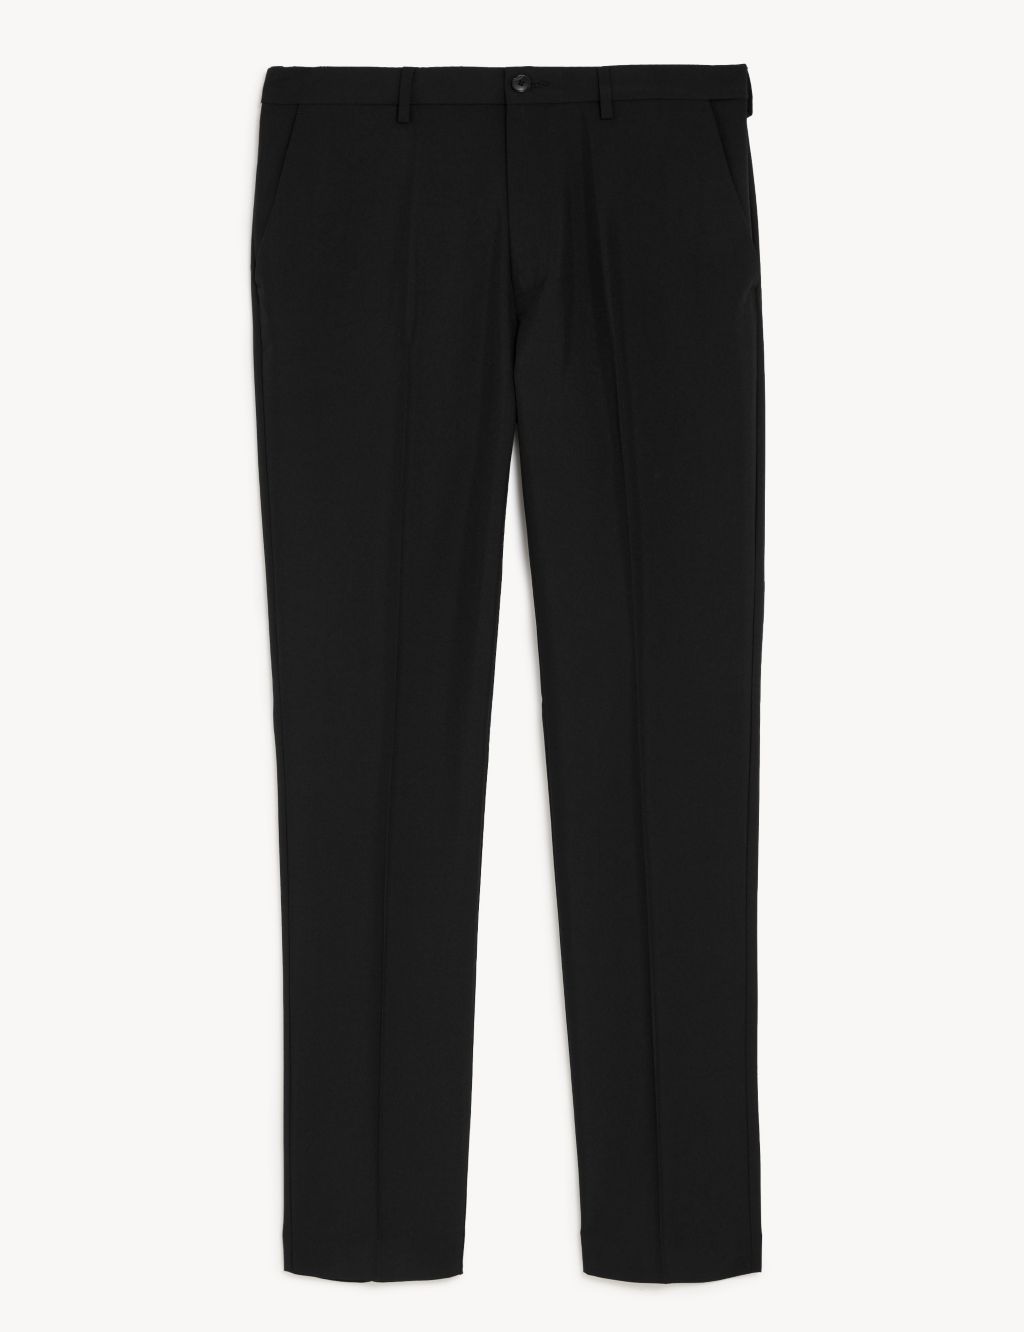 Slim Fit Trouser with Active Waist image 9